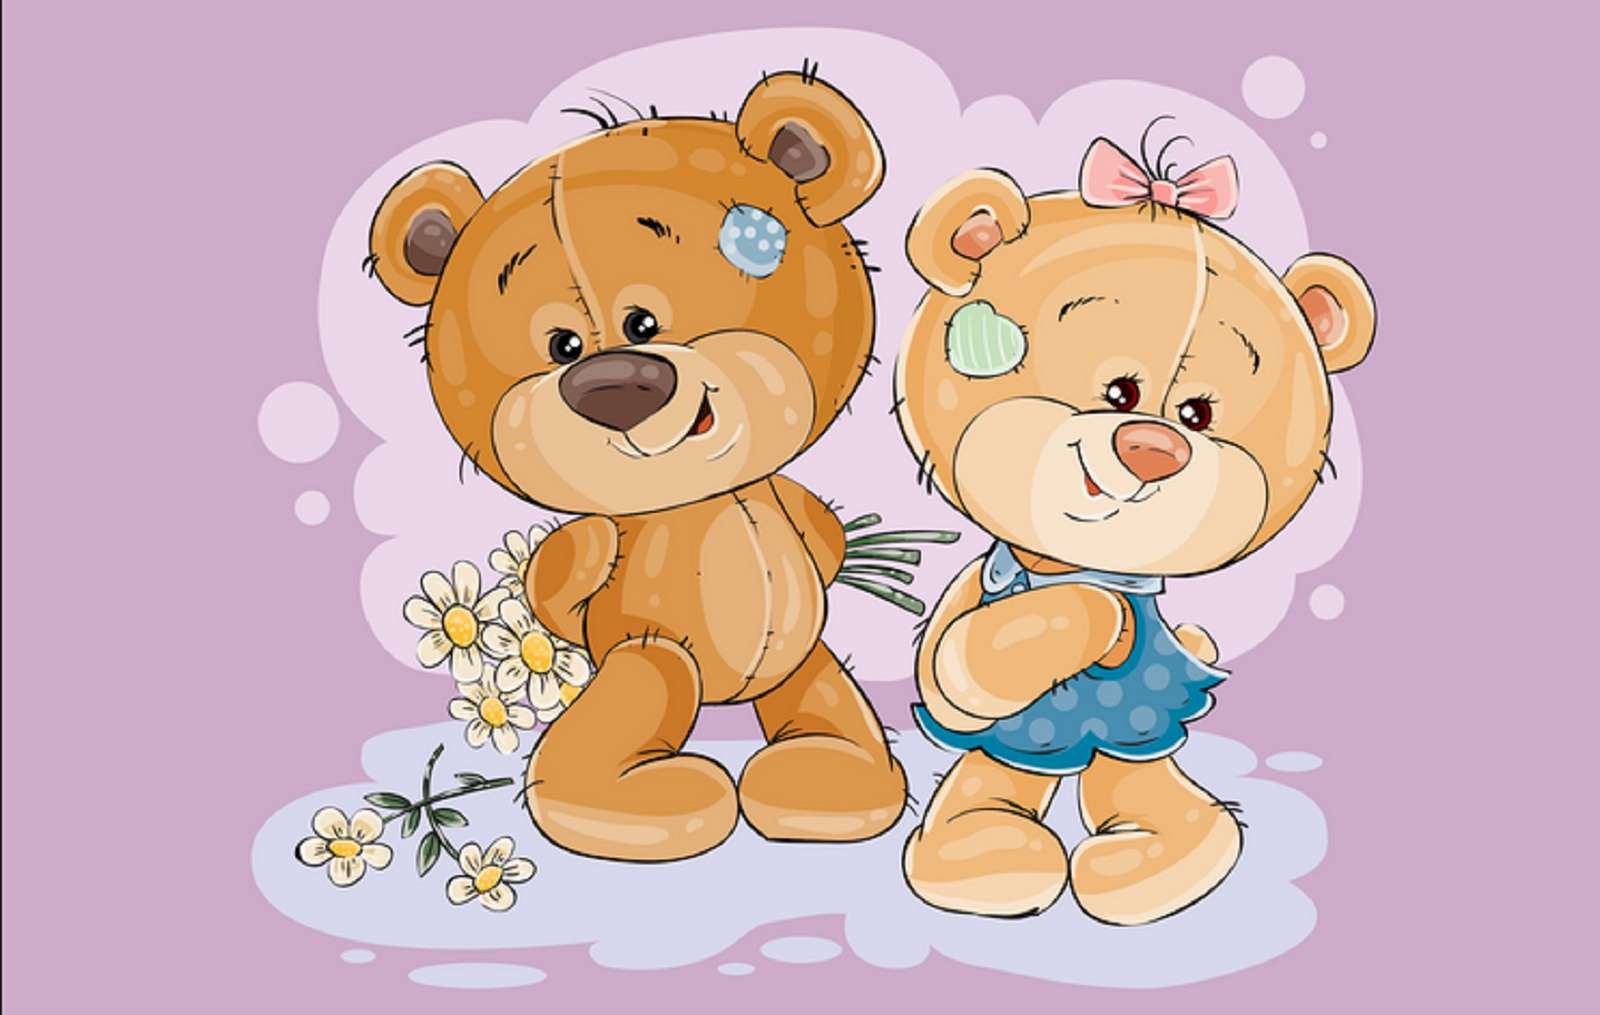 Valentine's Day gifts - two teddy bears online puzzle